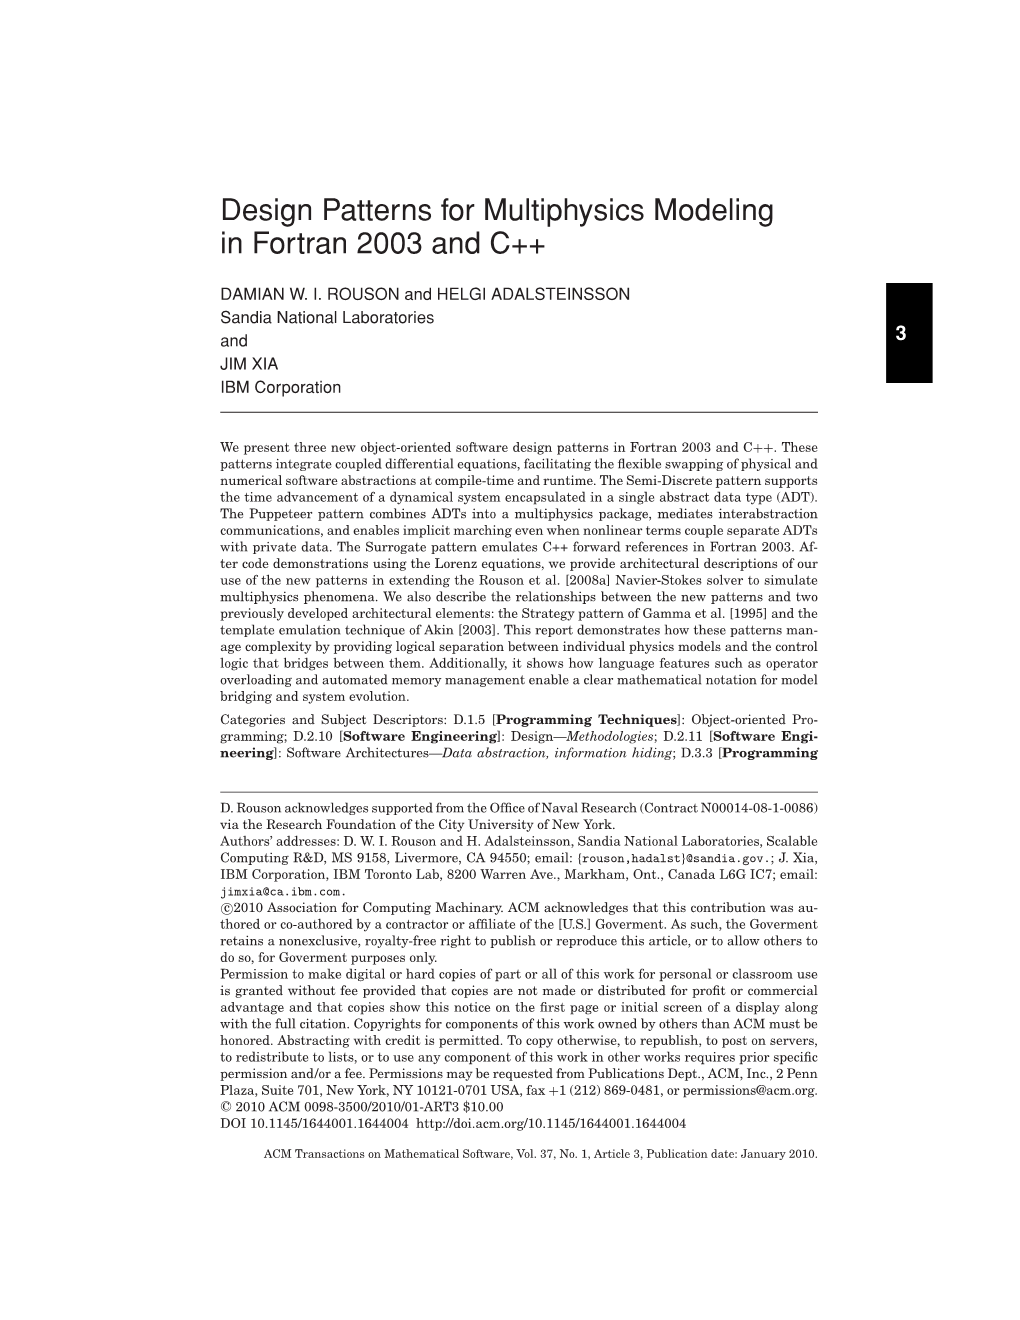 Design Patterns for Multiphysics Modeling in Fortran 2003 and C++